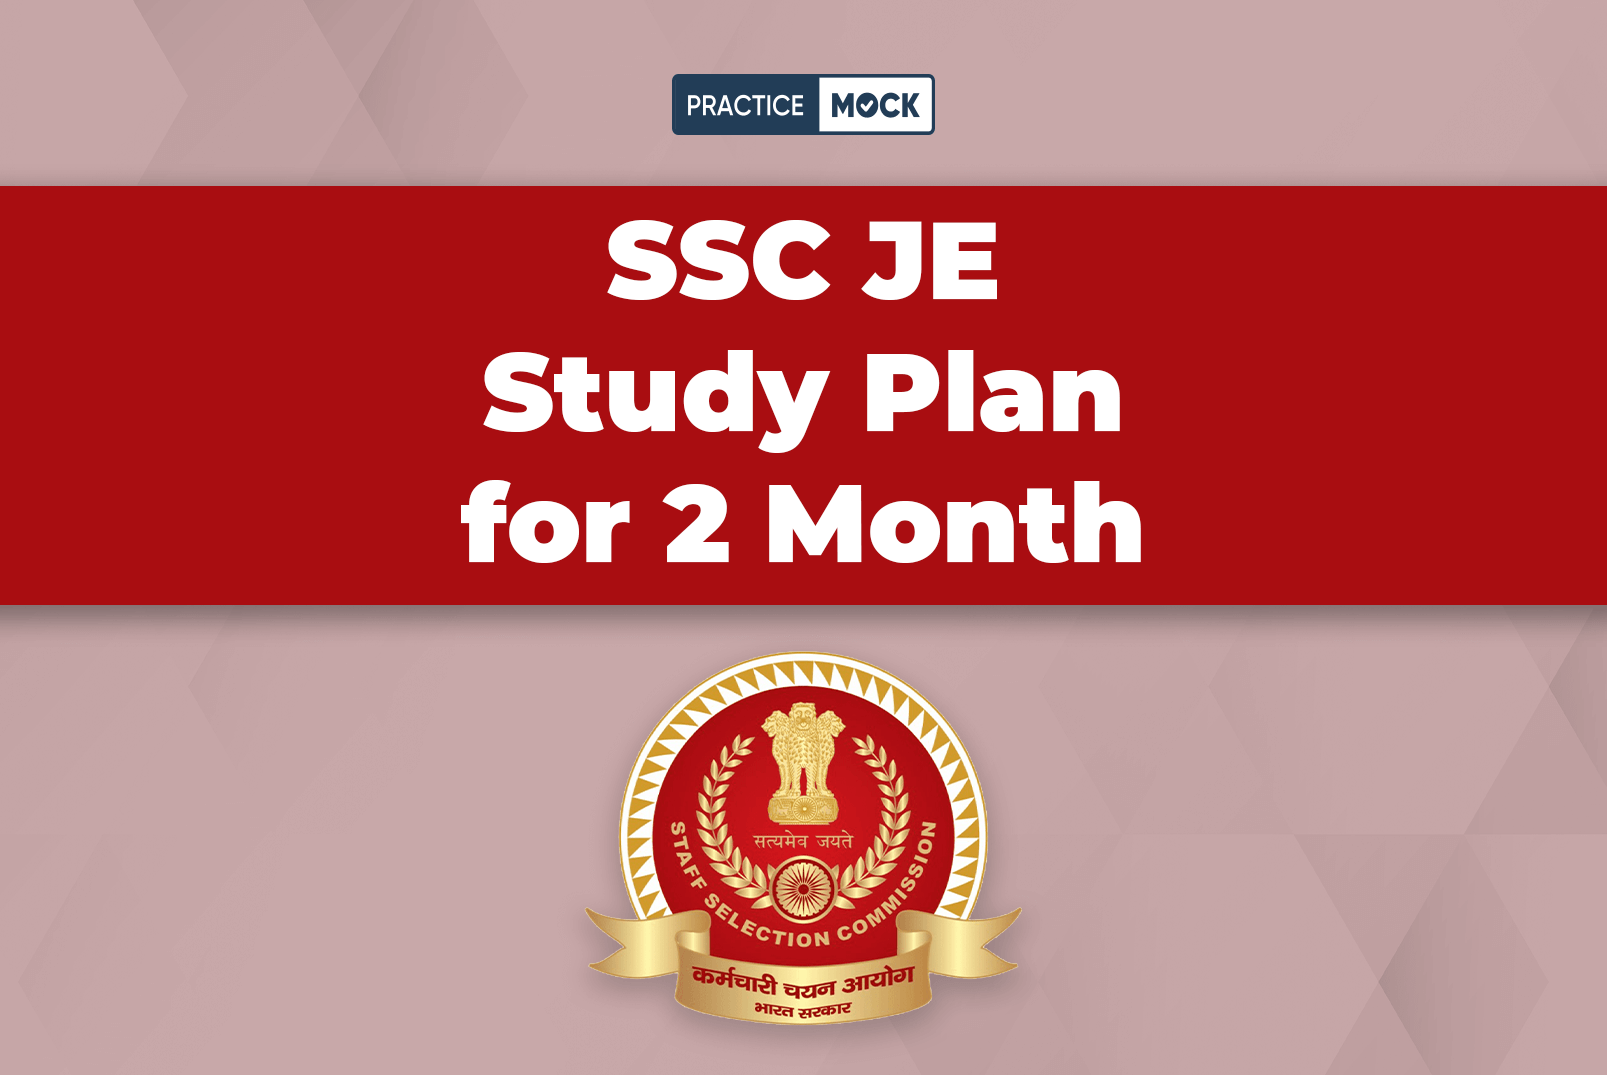 SSC JE Study Plan for 2 Months